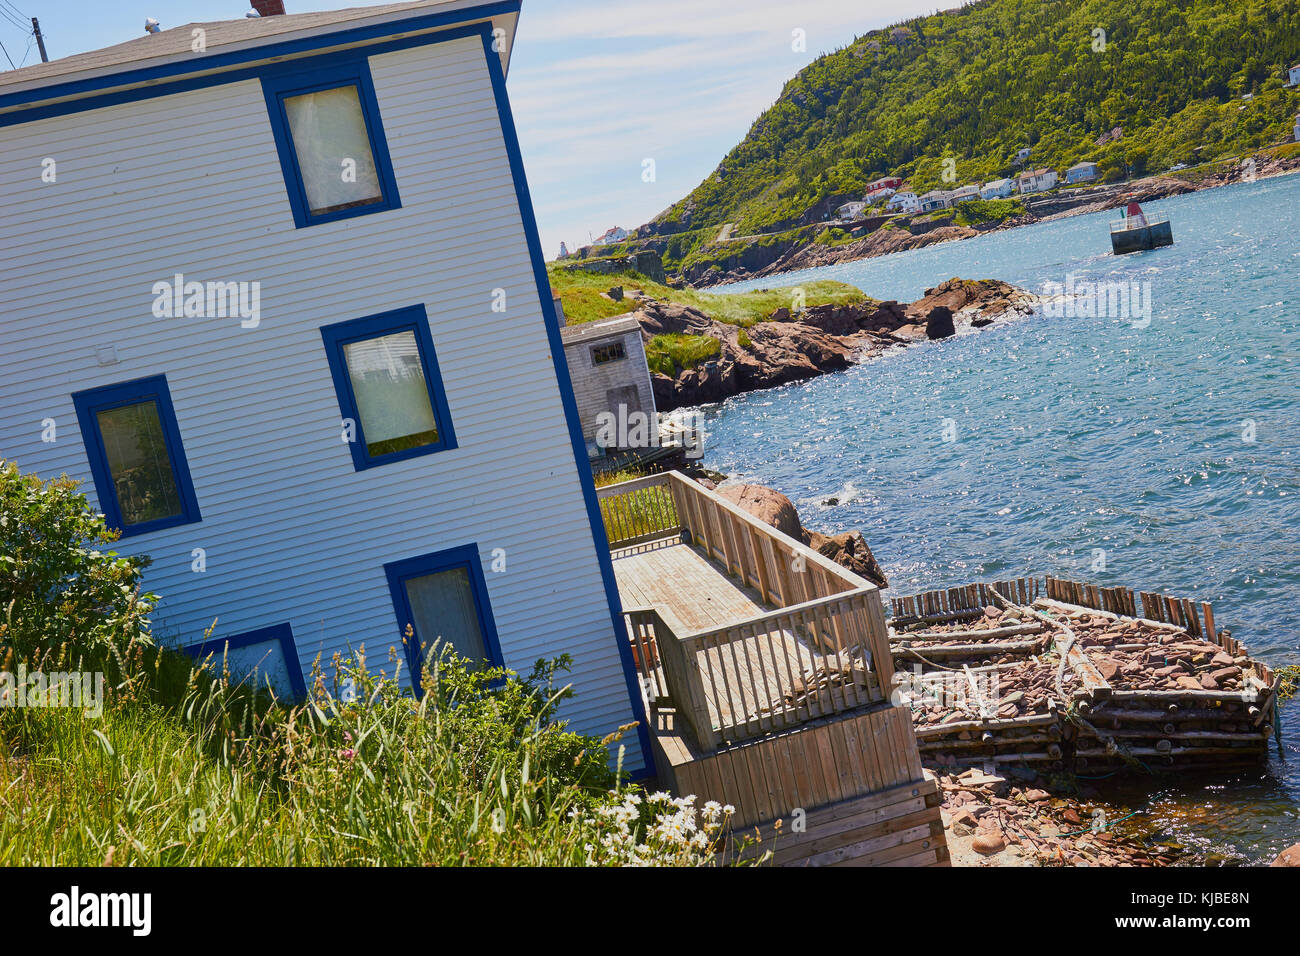 Waterfront wooden house in The Battery neighbourhood, Signal Hill, St John's, Newfoundland, Canada Stock Photo